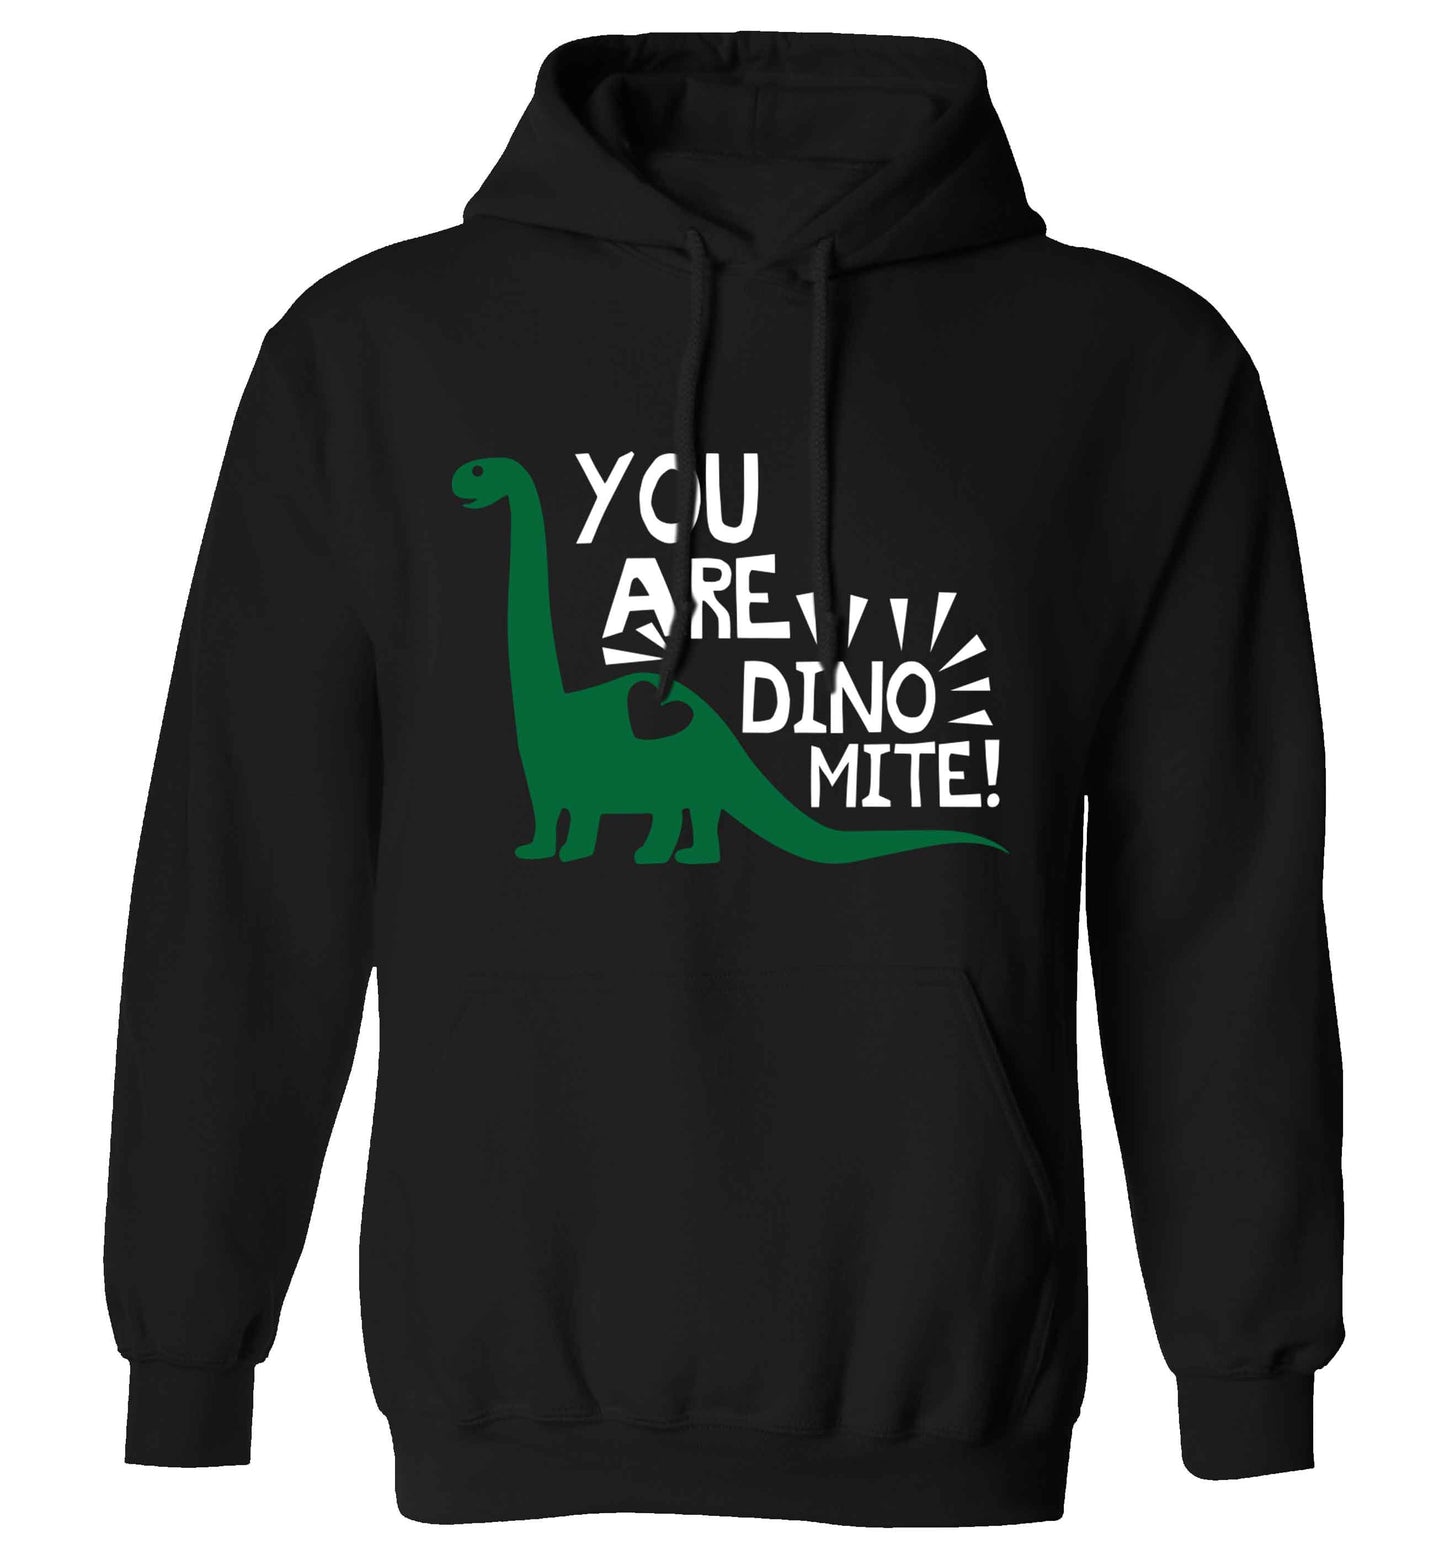 You are dinomite! adults unisex black hoodie 2XL